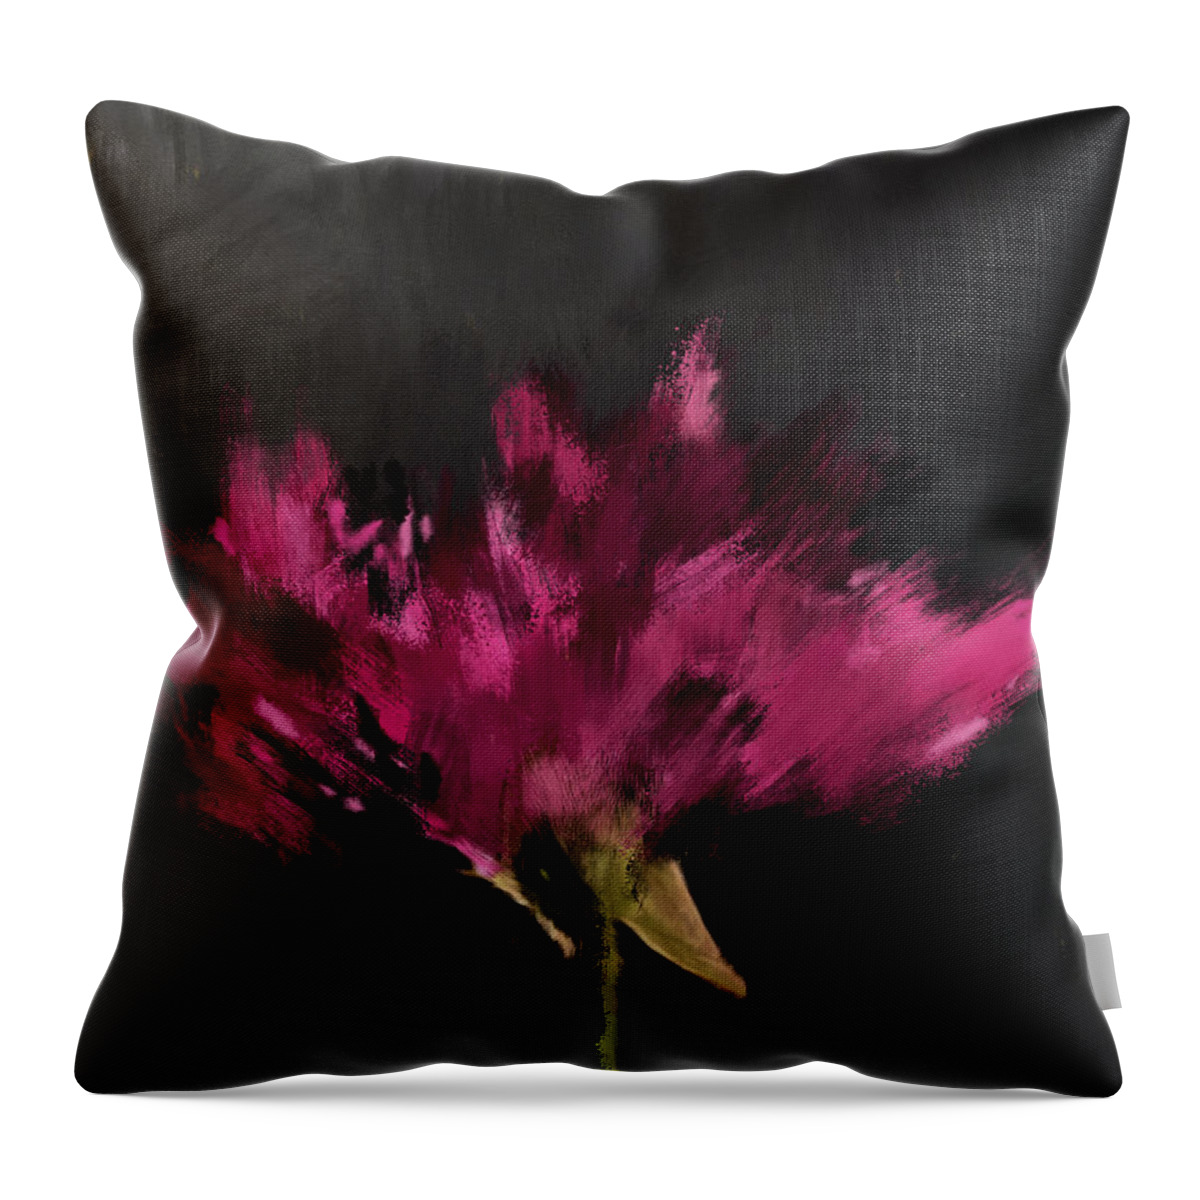 Flower Throw Pillow featuring the painting Triumphant Flower- Art by Linda Woods by Linda Woods